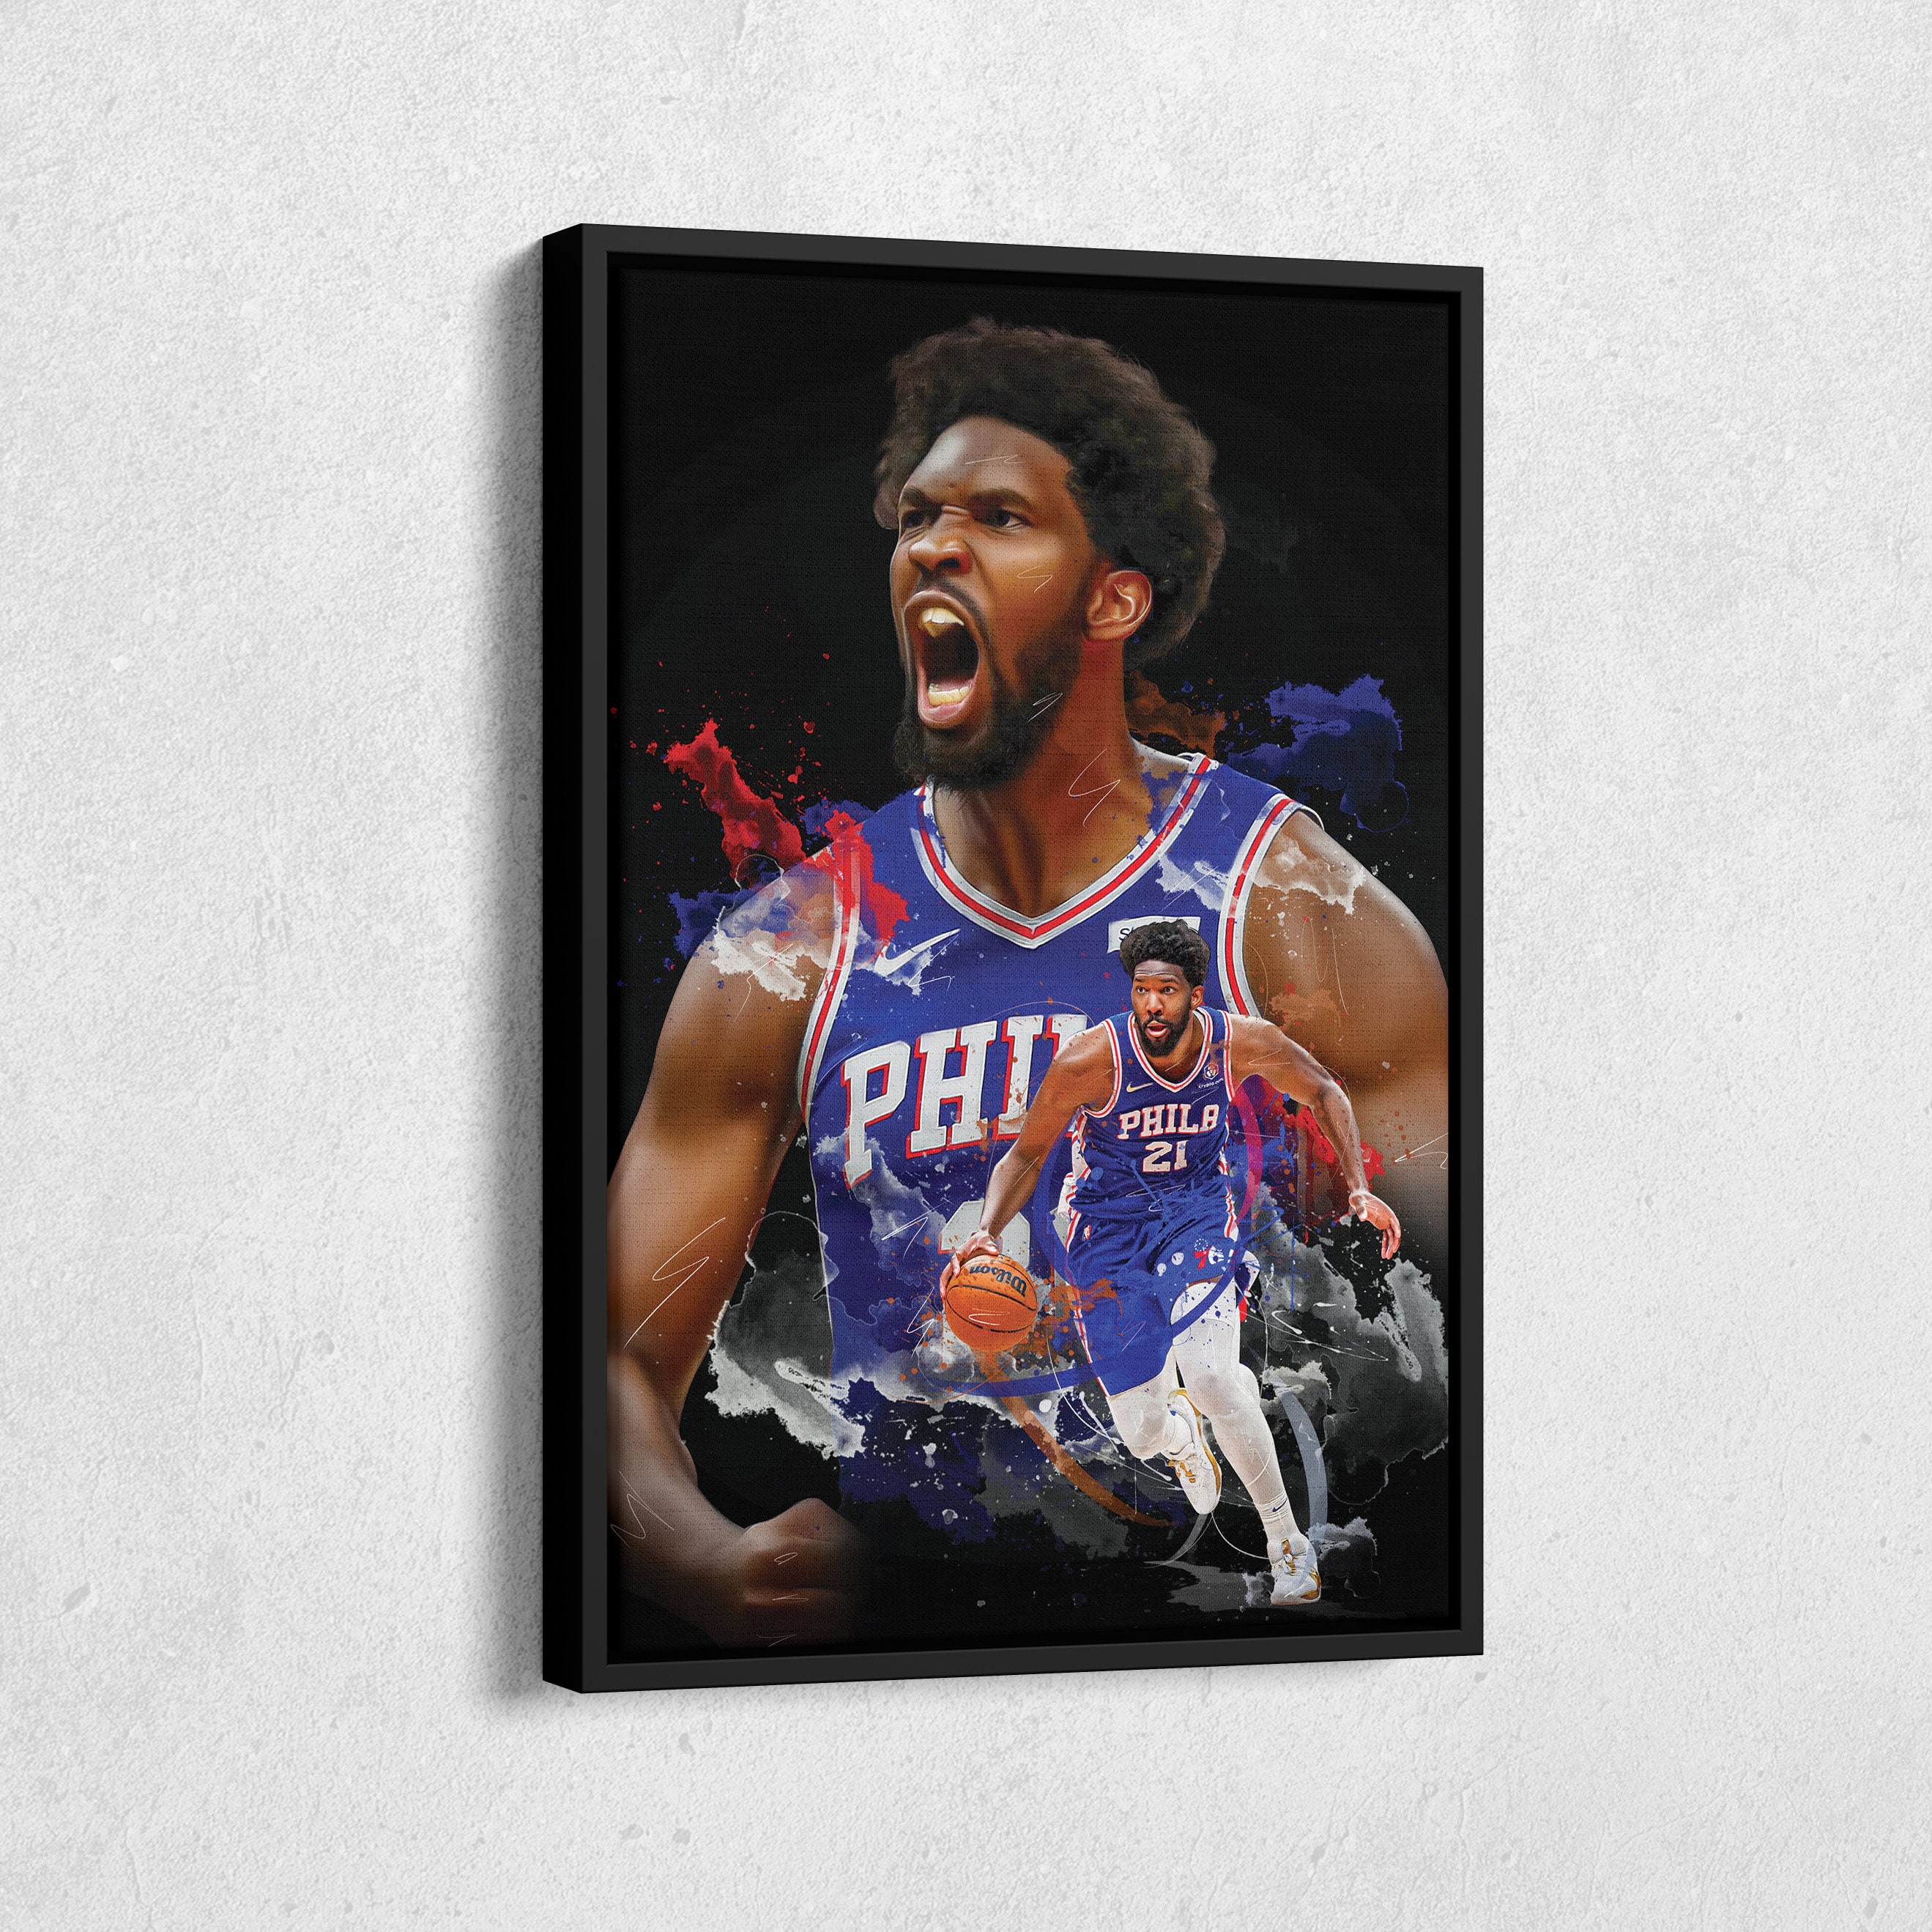 JOEL EMBIID & JAMES HARDEN & TYRESE MAXEY - 76ers Signed 8x10 RP Photo !!